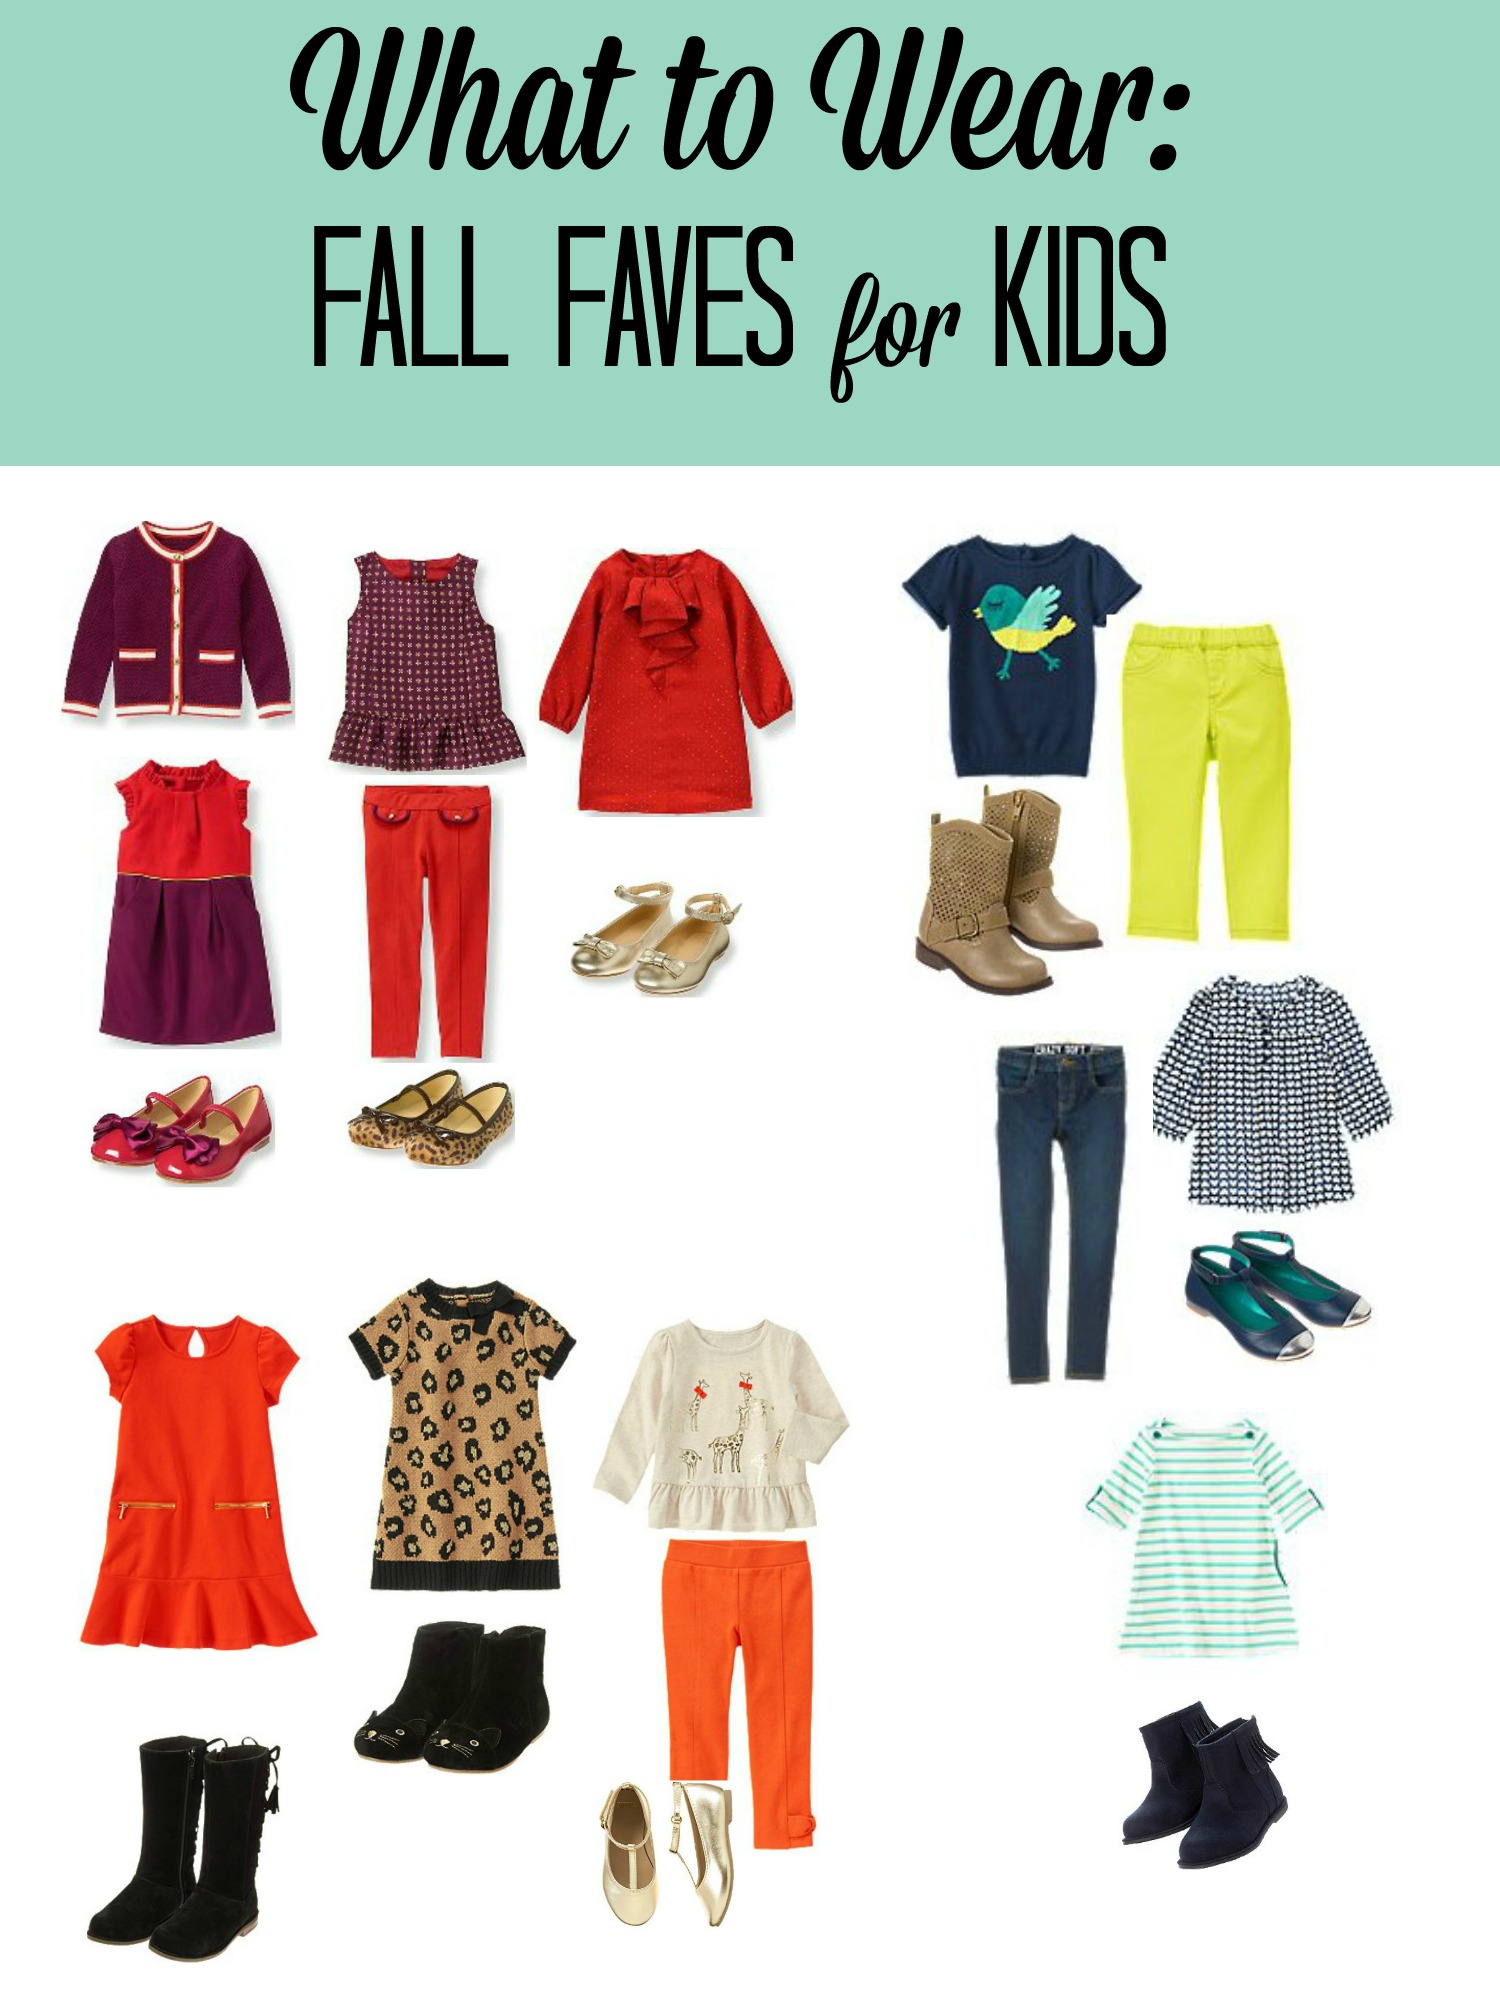 What to Wear Fall Faves for Kids